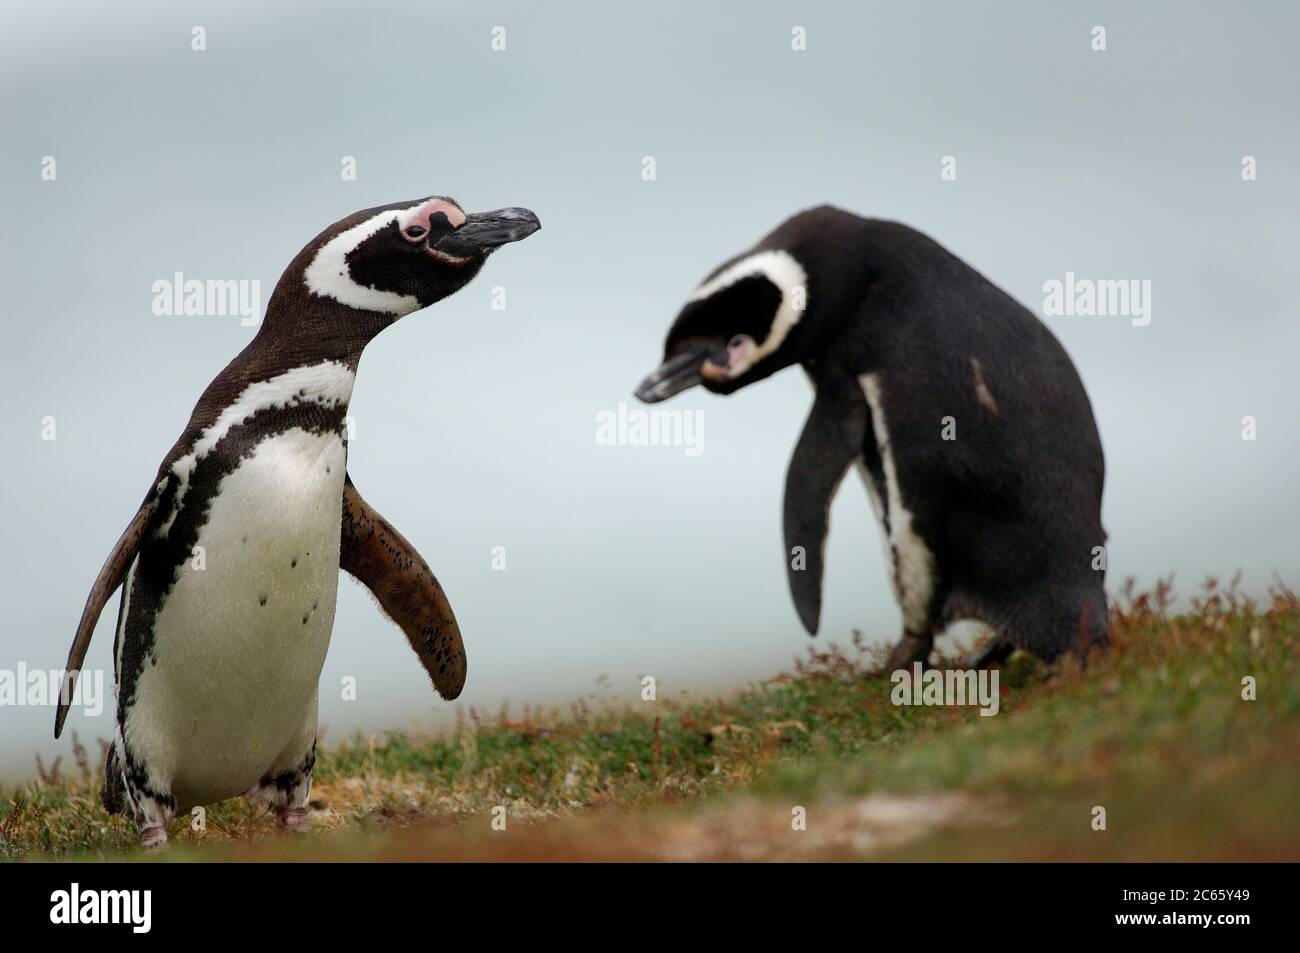 With a body size of ca. 73 cm the Magellanic penguin (Spheniscus magellanicus) belongs to the medium sized penguin species. The two black pectoral bands are characteristic and help to distinguish it from the very similar Humboldt penguin, which has only one such band. Stock Photo